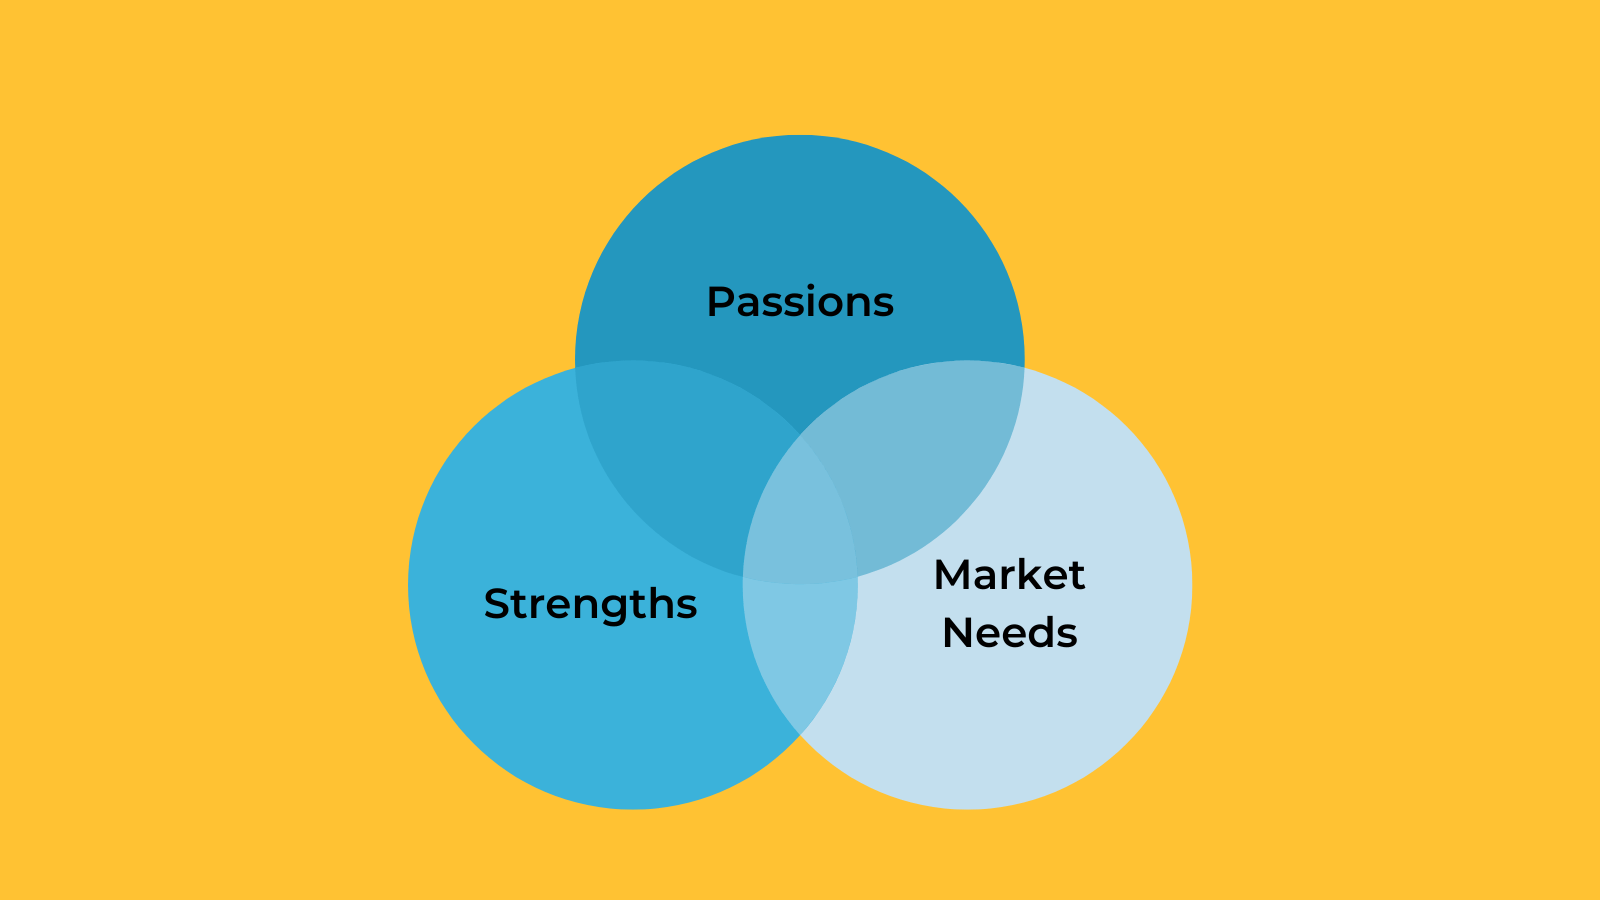 A Venn diagram with three overlapping circles labeled passions, strengths, and market needs